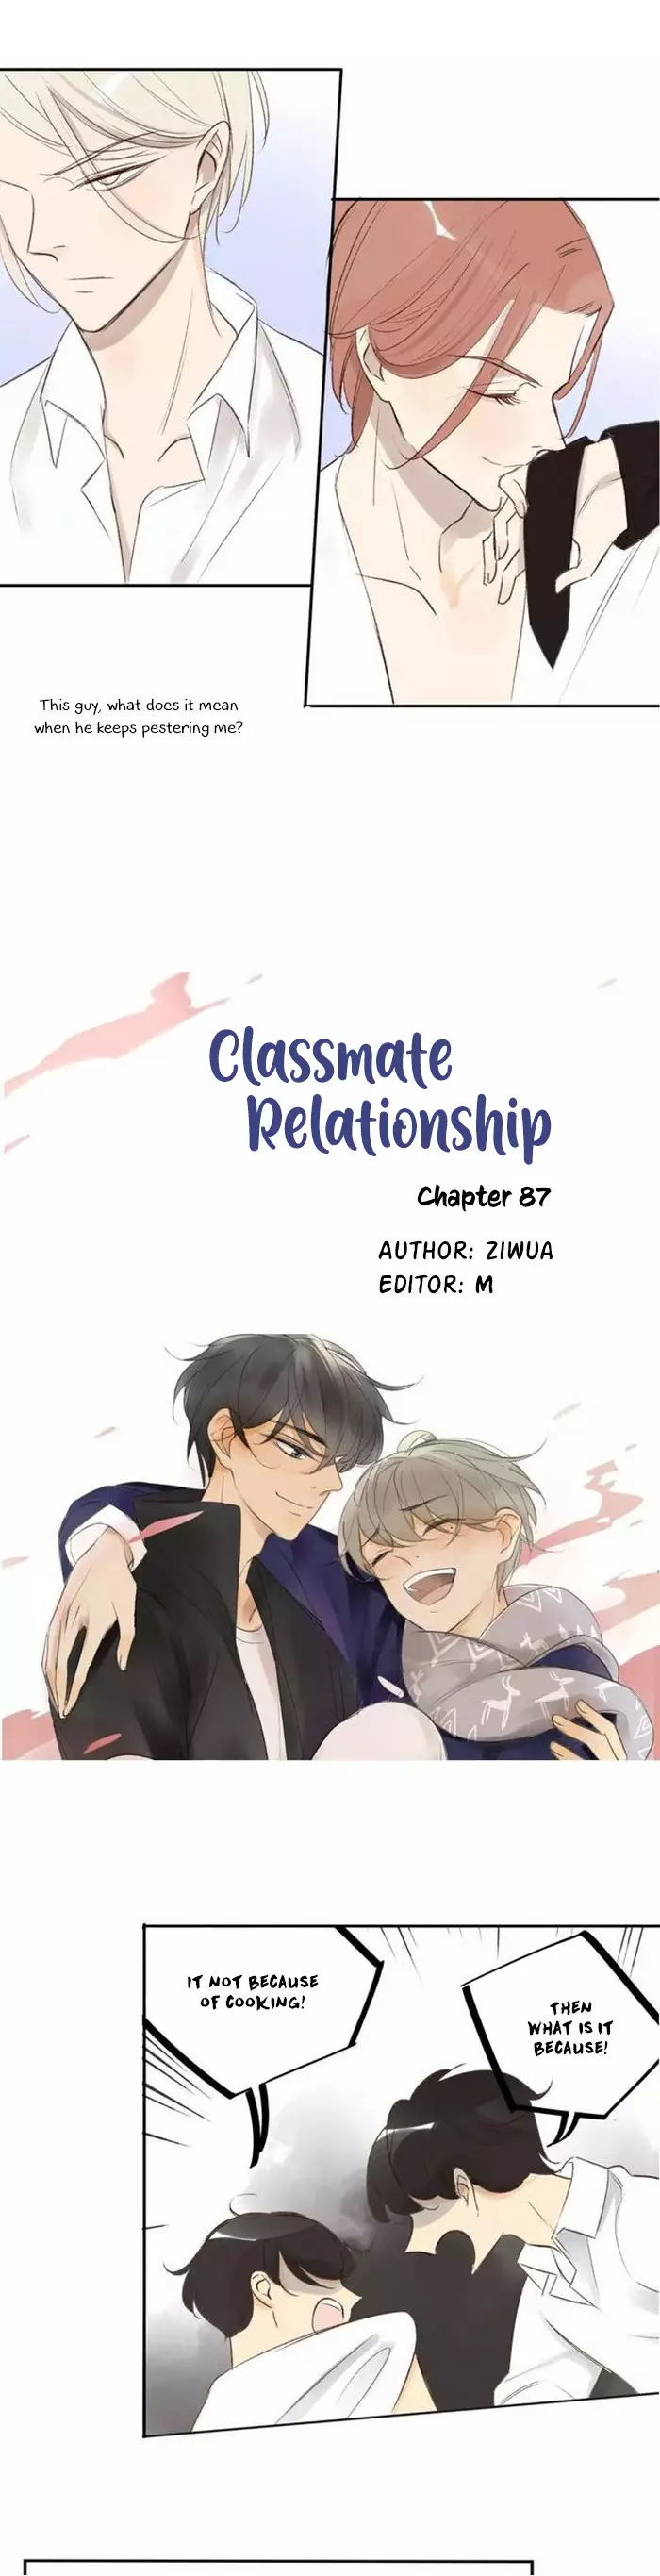 Classmate Relationship? - 87 page 2-8ecb1832